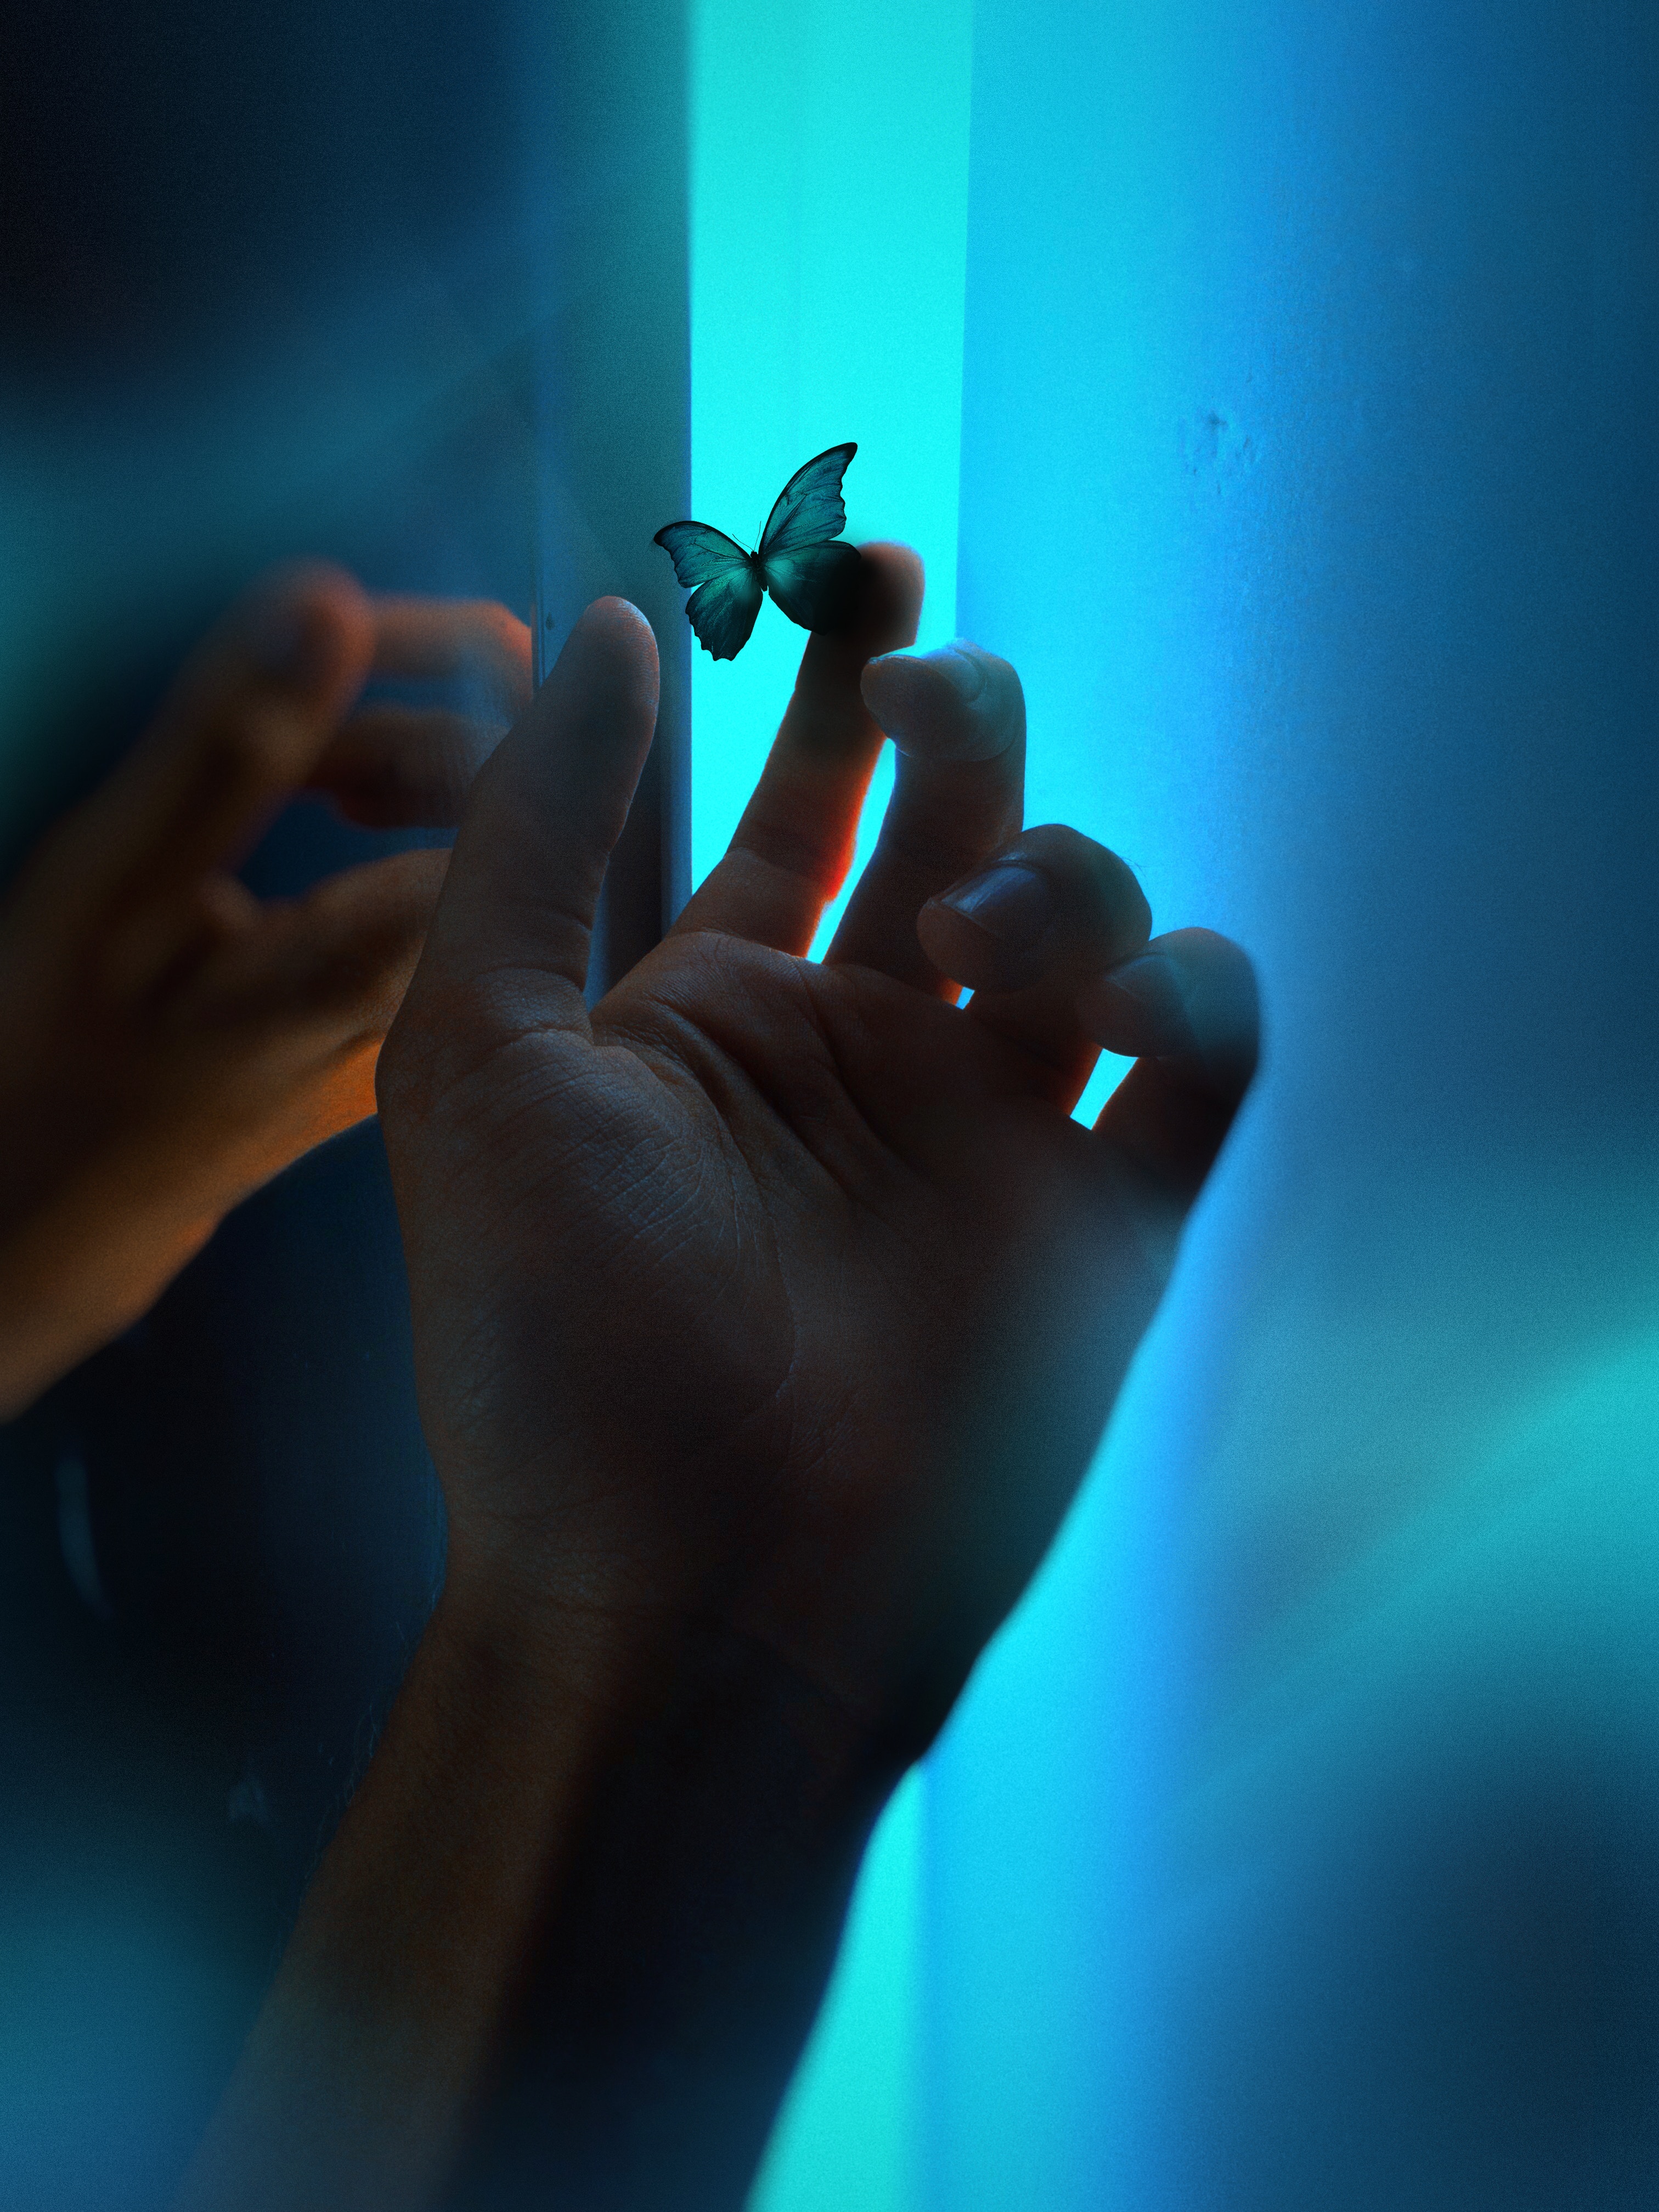 butterfly, blue, hand, miscellanea, miscellaneous, neon, glow, fingers cellphone